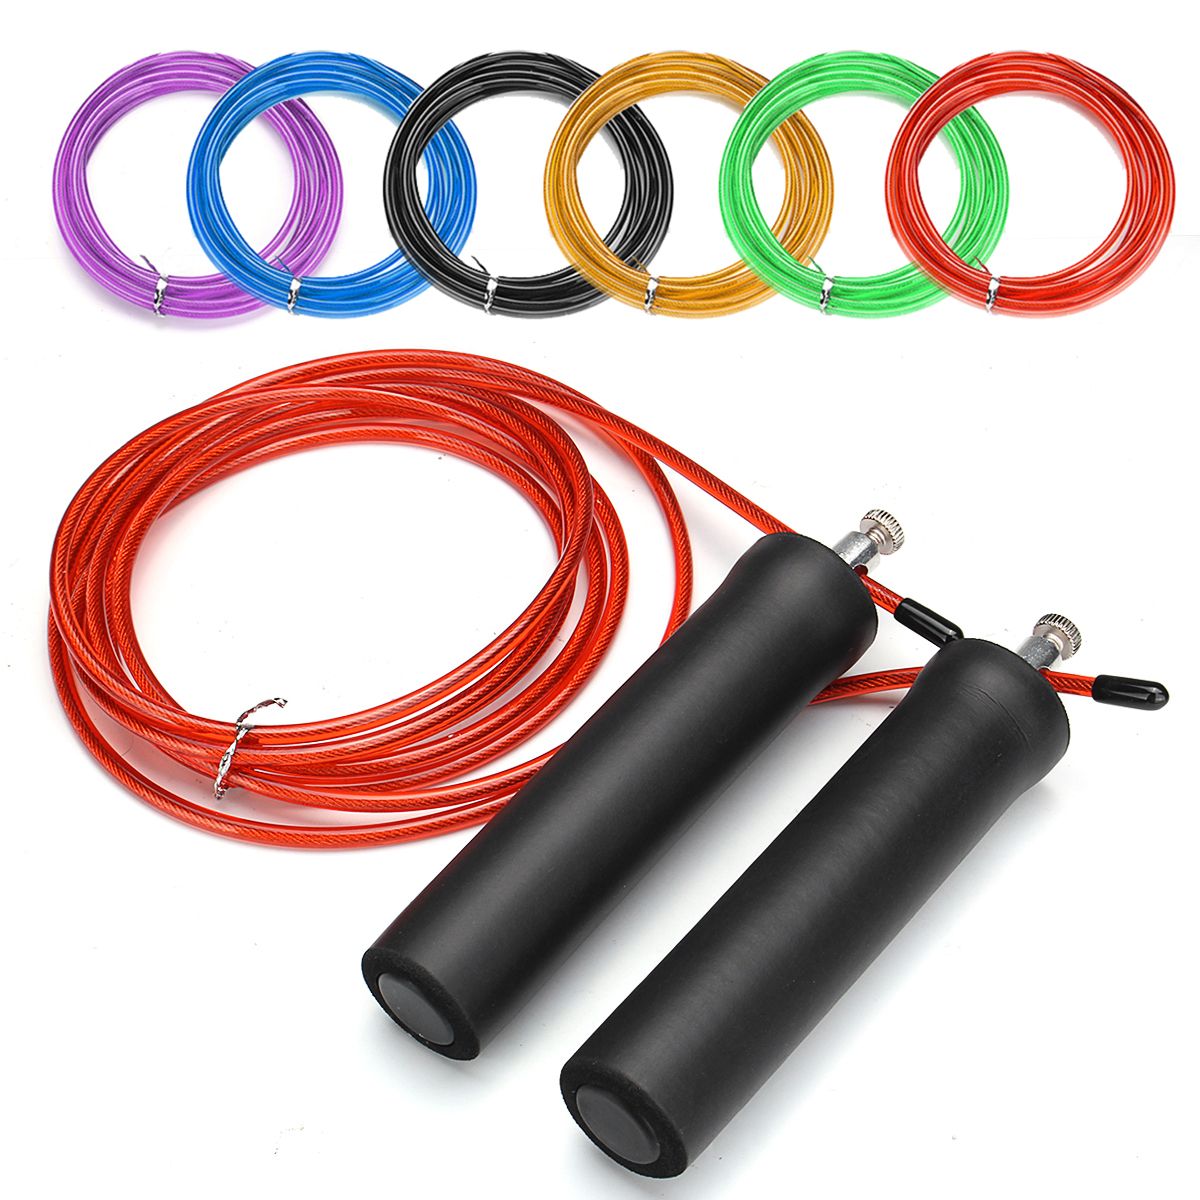 3M-Steel-Wire-Speed-Skipping-Rope-Jumping-Rope-Adjustable-Crossfit-Fitnesss-Exercise-1307727